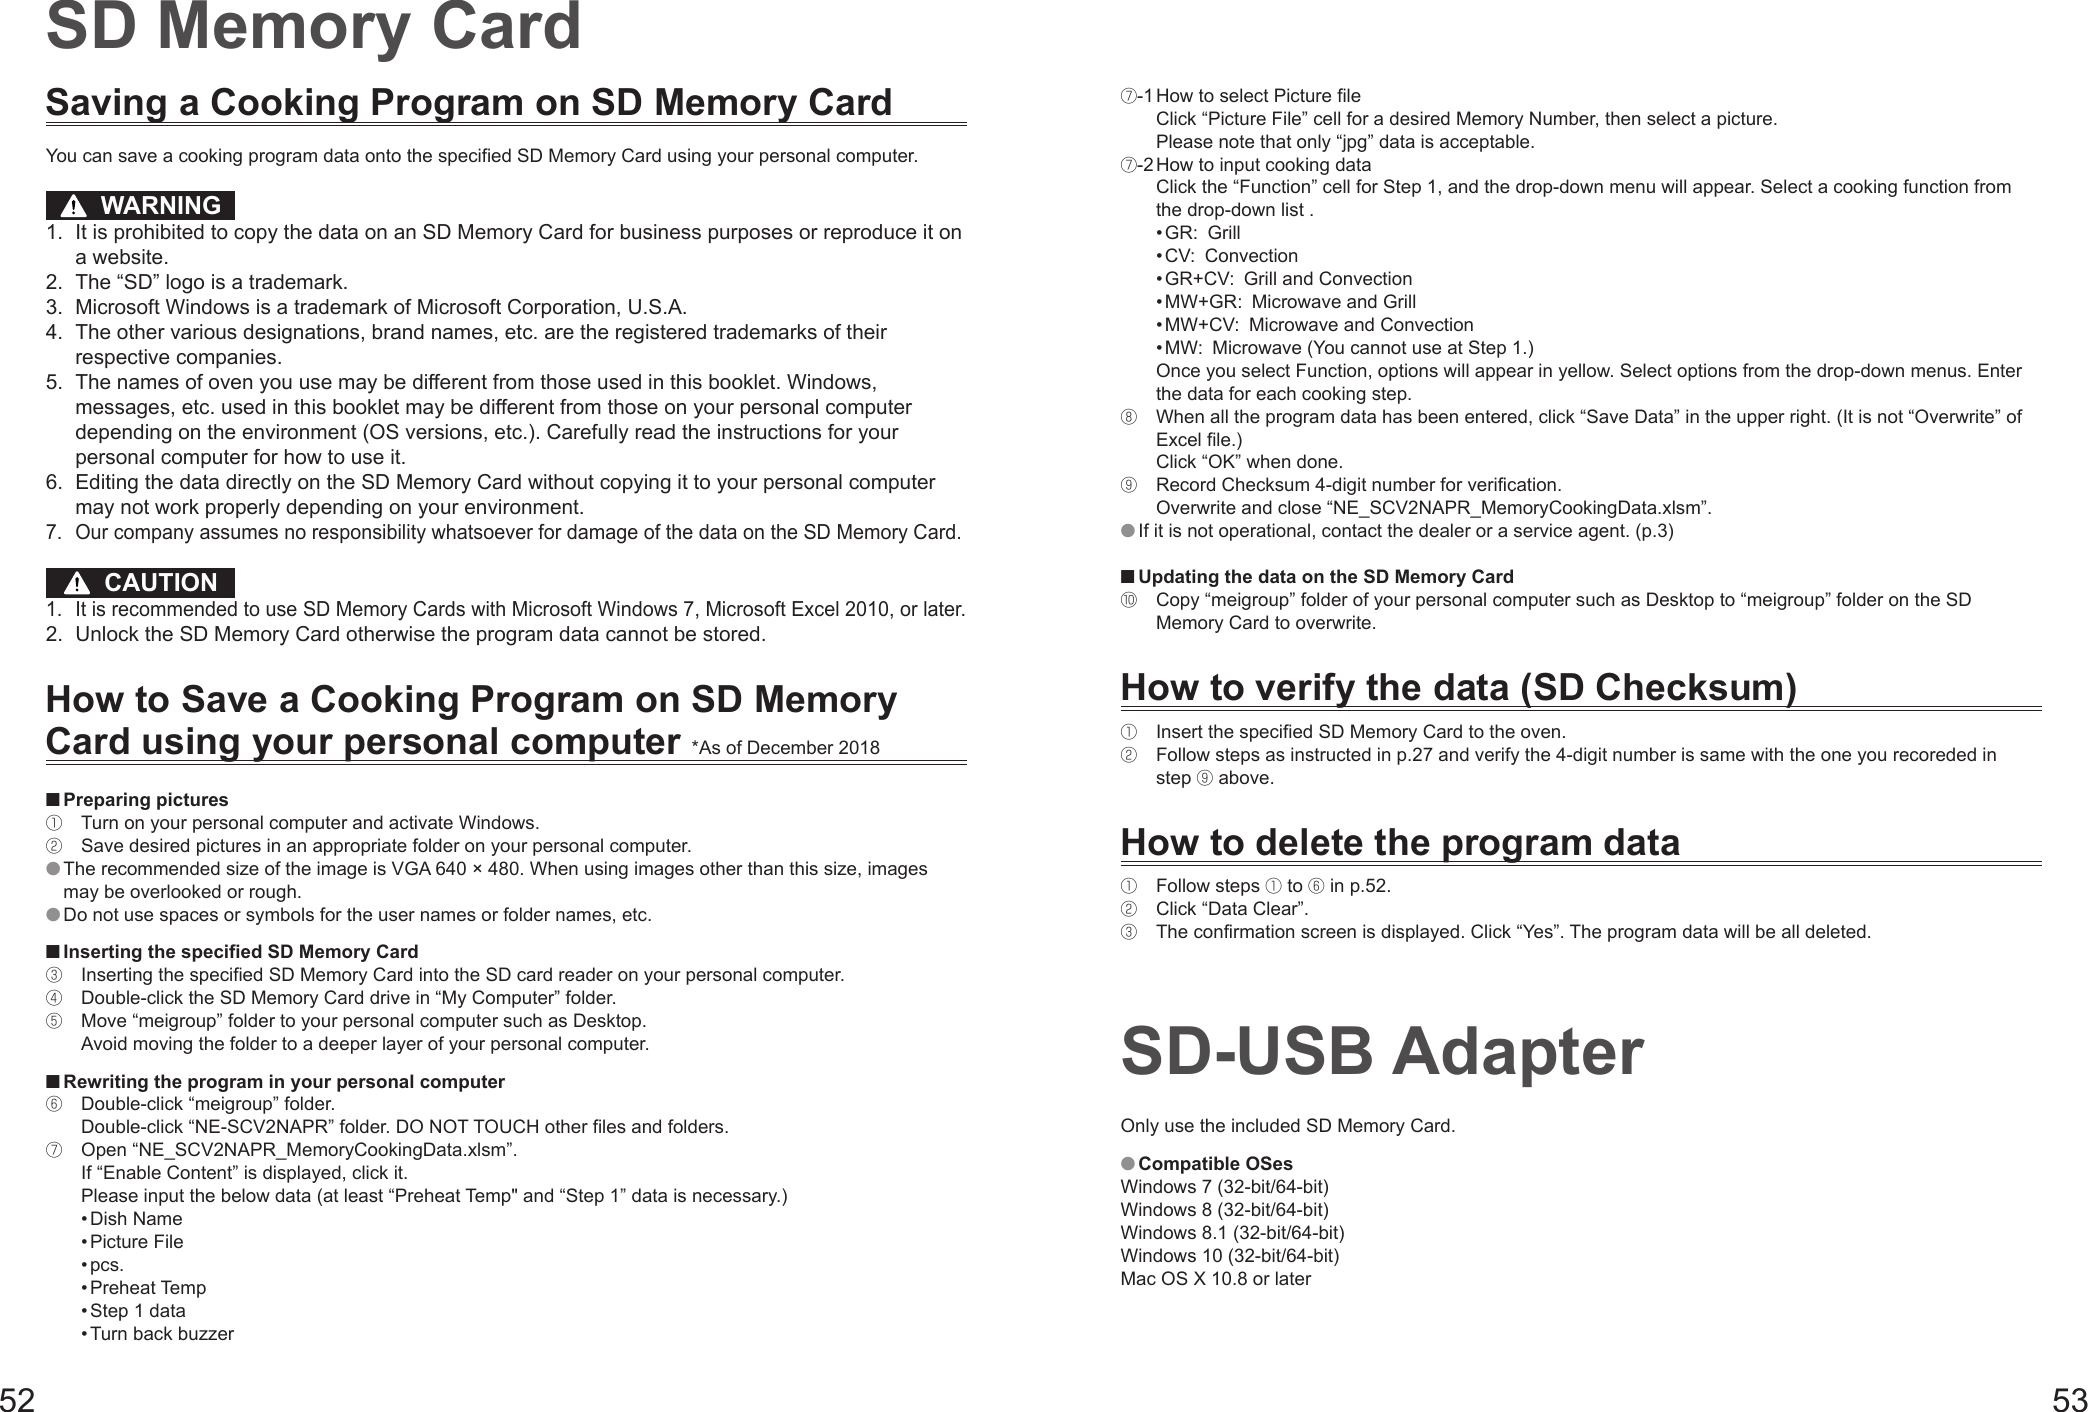 52 53Saving a Cooking Program on SD Memory CardYou can save a cooking program data onto the specified SD Memory Card using your personal computer.  WARNING1.  It is prohibited to copy the data on an SD Memory Card for business purposes or reproduce it on a website.2.  The “SD” logo is a trademark.3.  Microsoft Windows is a trademark of Microsoft Corporation, U.S.A.4.  The other various designations, brand names, etc. are the registered trademarks of their respective companies.5.  The names of oven you use may be different from those used in this booklet. Windows, messages, etc. used in this booklet may be different from those on your personal computer depending on the environment (OS versions, etc.). Carefully read the instructions for your personal computer for how to use it.6.  Editing the data directly on the SD Memory Card without copying it to your personal computer may not work properly depending on your environment. 7.  Our company assumes no responsibility whatsoever for damage of the data on the SD Memory Card.  CAUTION1.  It is recommended to use SD Memory Cards with Microsoft Windows 7, Microsoft Excel 2010, or later.2.  Unlock the SD Memory Card otherwise the program data cannot be stored.How to Save a Cooking Program on SD Memory Card using your personal computer *As of December 2018 Preparing pictures①  Turn on your personal computer and activate Windows.②  Save desired pictures in an appropriate folder on your personal computer. The recommended size of the image is VGA 640 × 480. When using images other than this size, images may be overlooked or rough. Do not use spaces or symbols for the user names or folder names, etc. Inserting the specified SD Memory Card③  Inserting the specified SD Memory Card into the SD card reader on your personal computer.④  Double-click the SD Memory Card drive in “My Computer” folder.⑤  Move “meigroup” folder to your personal computer such as Desktop. Avoid moving the folder to a deeper layer of your personal computer. Rewriting the program in your personal computer⑥  Double-click “meigroup” folder. Double-click “NE-SCV2NAPR” folder. DO NOT TOUCH other files and folders.⑦  Open “NE_SCV2NAPR_MemoryCookingData.xlsm”. If “Enable Content” is displayed, click it.  Please input the below data (at least “Preheat Temp&quot; and “Step 1” data is necessary.) • Dish Name • Picture File • pcs. • Preheat Temp • Step 1 data • Turn back buzzerSD Memory Card⑦-1  How to select Picture file Click “Picture File” cell for a desired Memory Number, then select a picture.  Please note that only “jpg” data is acceptable.⑦-2  How to input cooking data Click the “Function” cell for Step 1, and the drop-down menu will appear. Select a cooking function from the drop-down list .  • GR: Grill  • CV: Convection  • GR+CV:  Grill and Convection  • MW+GR:  Microwave and Grill  • MW+CV:  Microwave and Convection  • MW:  Microwave (You cannot use at Step 1.) Once you select Function, options will appear in yellow. Select options from the drop-down menus. Enter the data for each cooking step.⑧  When all the program data has been entered, click “Save Data” in the upper right. (It is not “Overwrite” of Excel file.) Click “OK” when done. ⑨  Record Checksum 4-digit number for verification. Overwrite and close “NE_SCV2NAPR_MemoryCookingData.xlsm”. If it is not operational, contact the dealer or a service agent. (p.3) Updating the data on the SD Memory Card⑩  Copy “meigroup” folder of your personal computer such as Desktop to “meigroup” folder on the SD Memory Card to overwrite.How to verify the data (SD Checksum)①  Insert the specified SD Memory Card to the oven.②  Follow steps as instructed in p.27 and verify the 4-digit number is same with the one you recoreded in step ⑨ above.How to delete the program data①  Follow steps ① to ⑥ in p.52.②  Click “Data Clear”.③  The confirmation screen is displayed. Click “Yes”. The program data will be all deleted.SD-USB AdapterOnly use the included SD Memory Card. Compatible OSesWindows 7 (32-bit/64-bit)Windows 8 (32-bit/64-bit)Windows 8.1 (32-bit/64-bit)Windows 10 (32-bit/64-bit)Mac OS X 10.8 or later